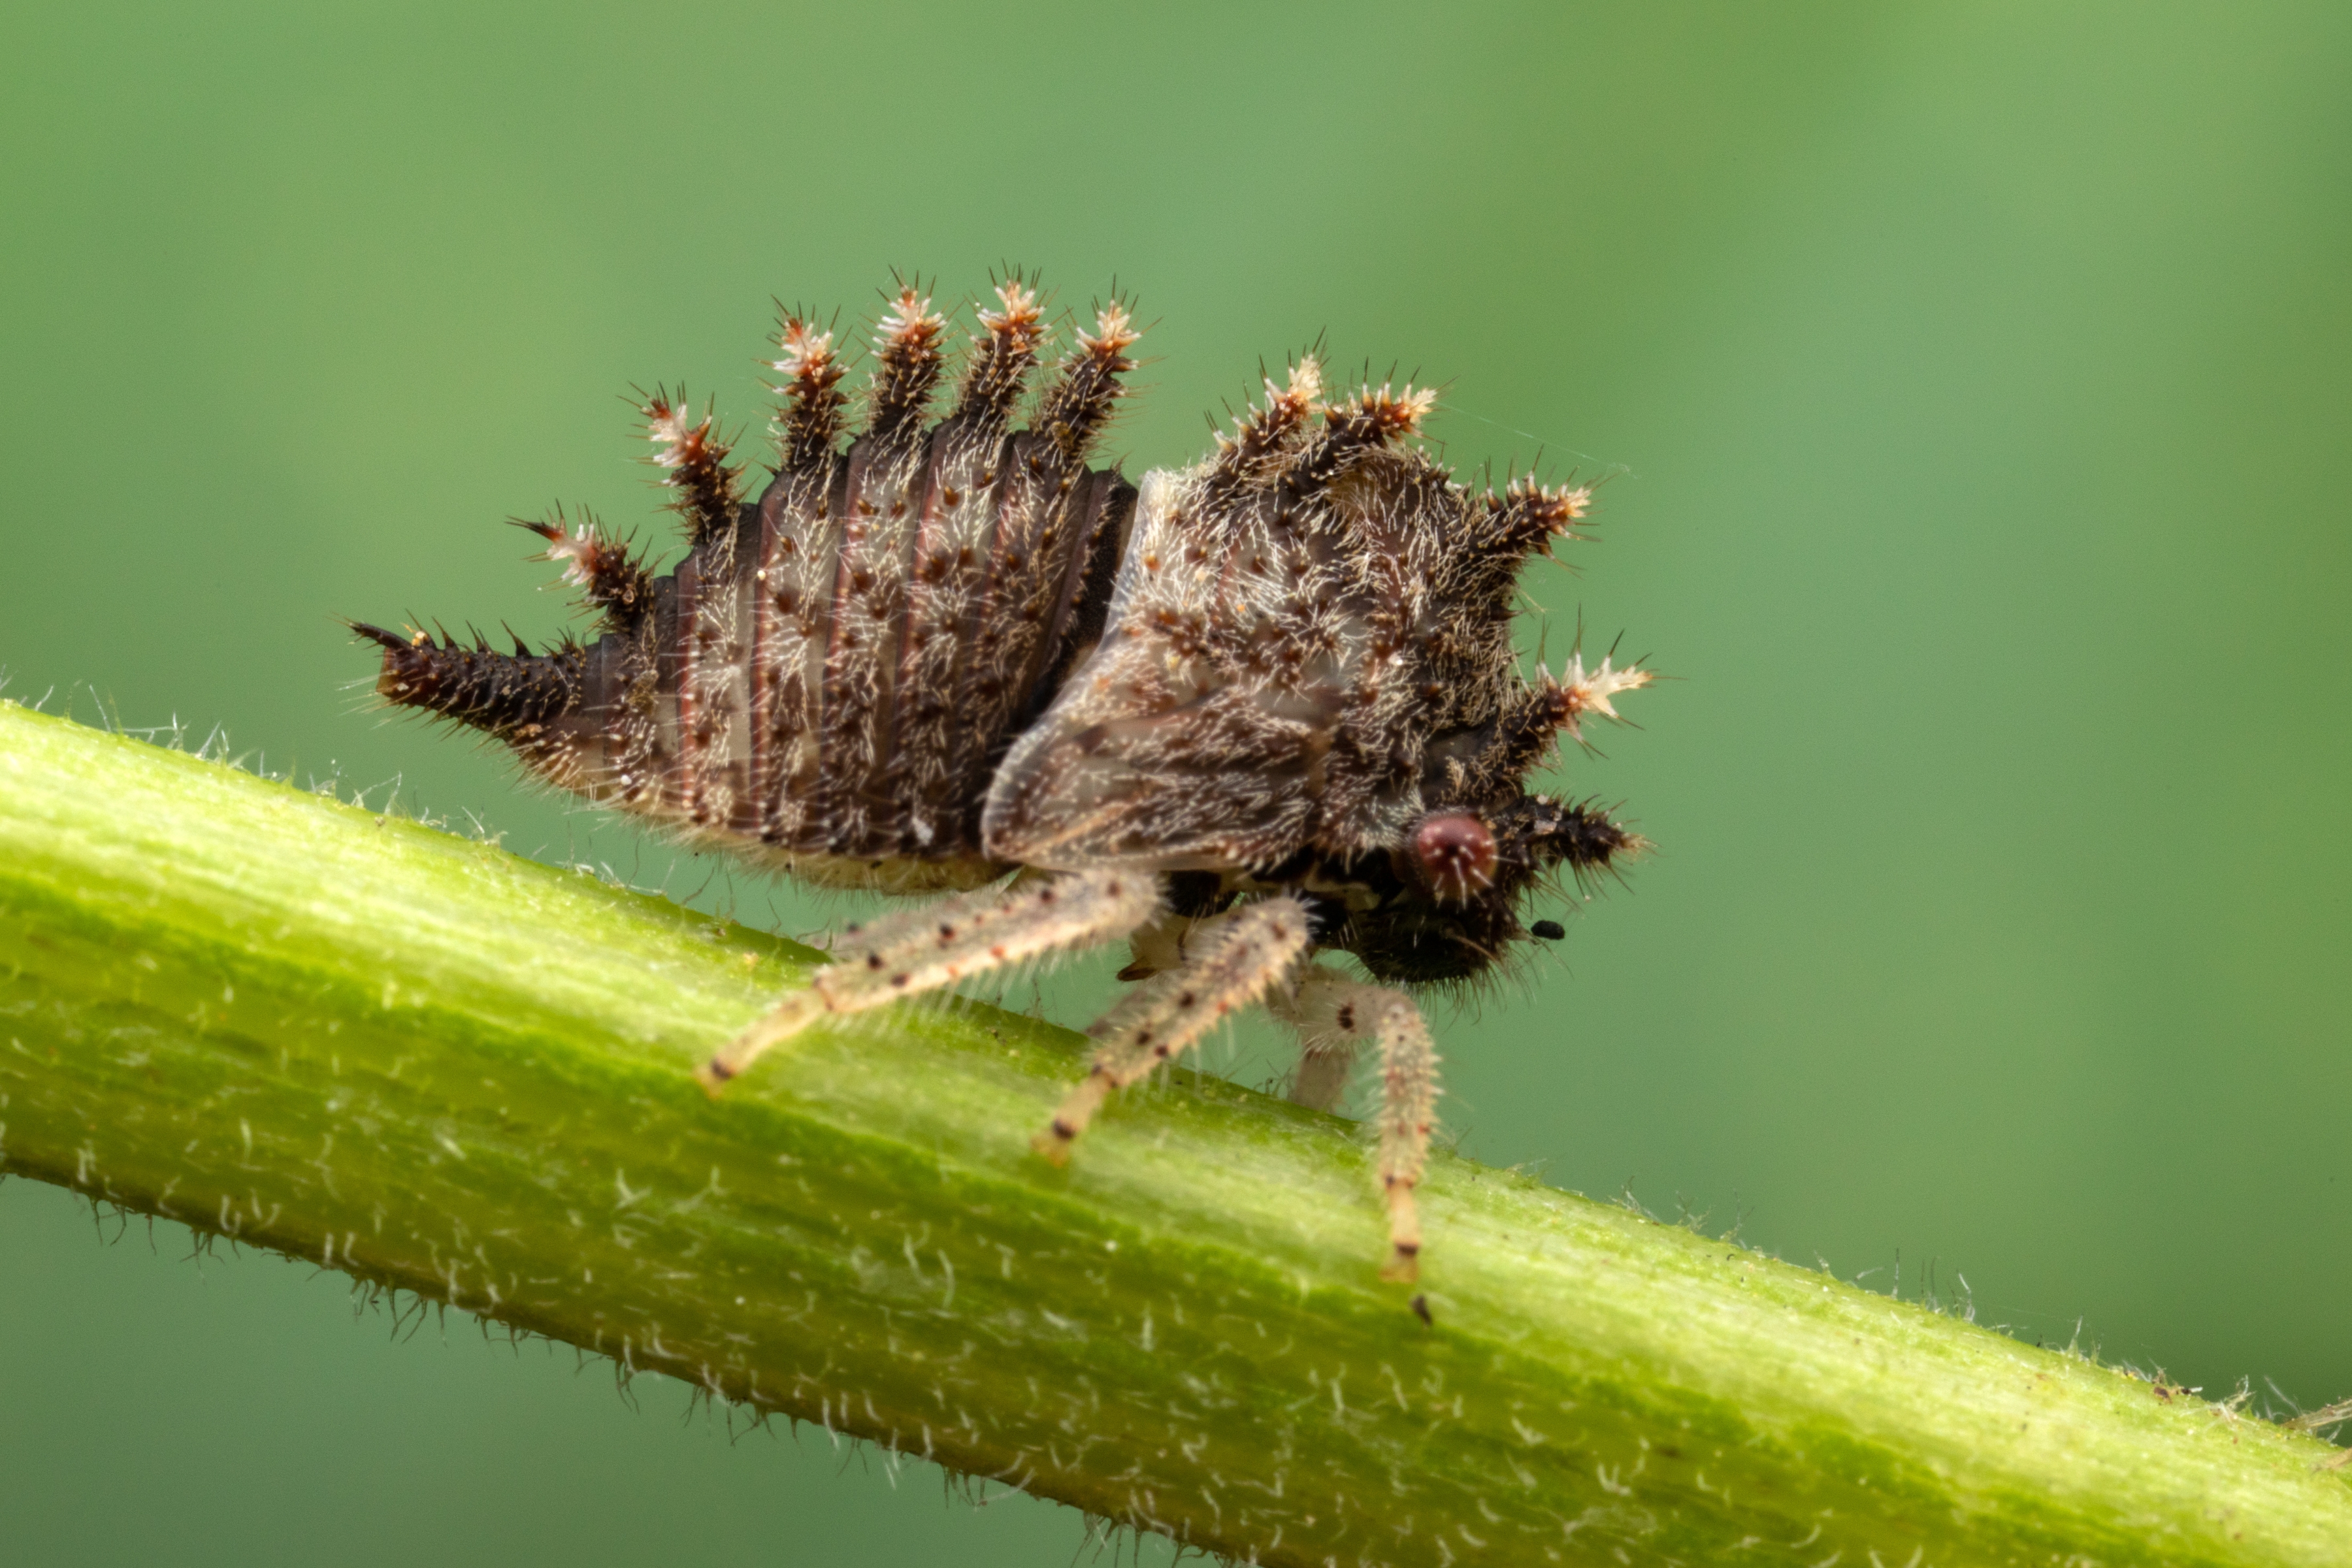 Insect in Membracidae family (typical treehoppers) by Alex Wild